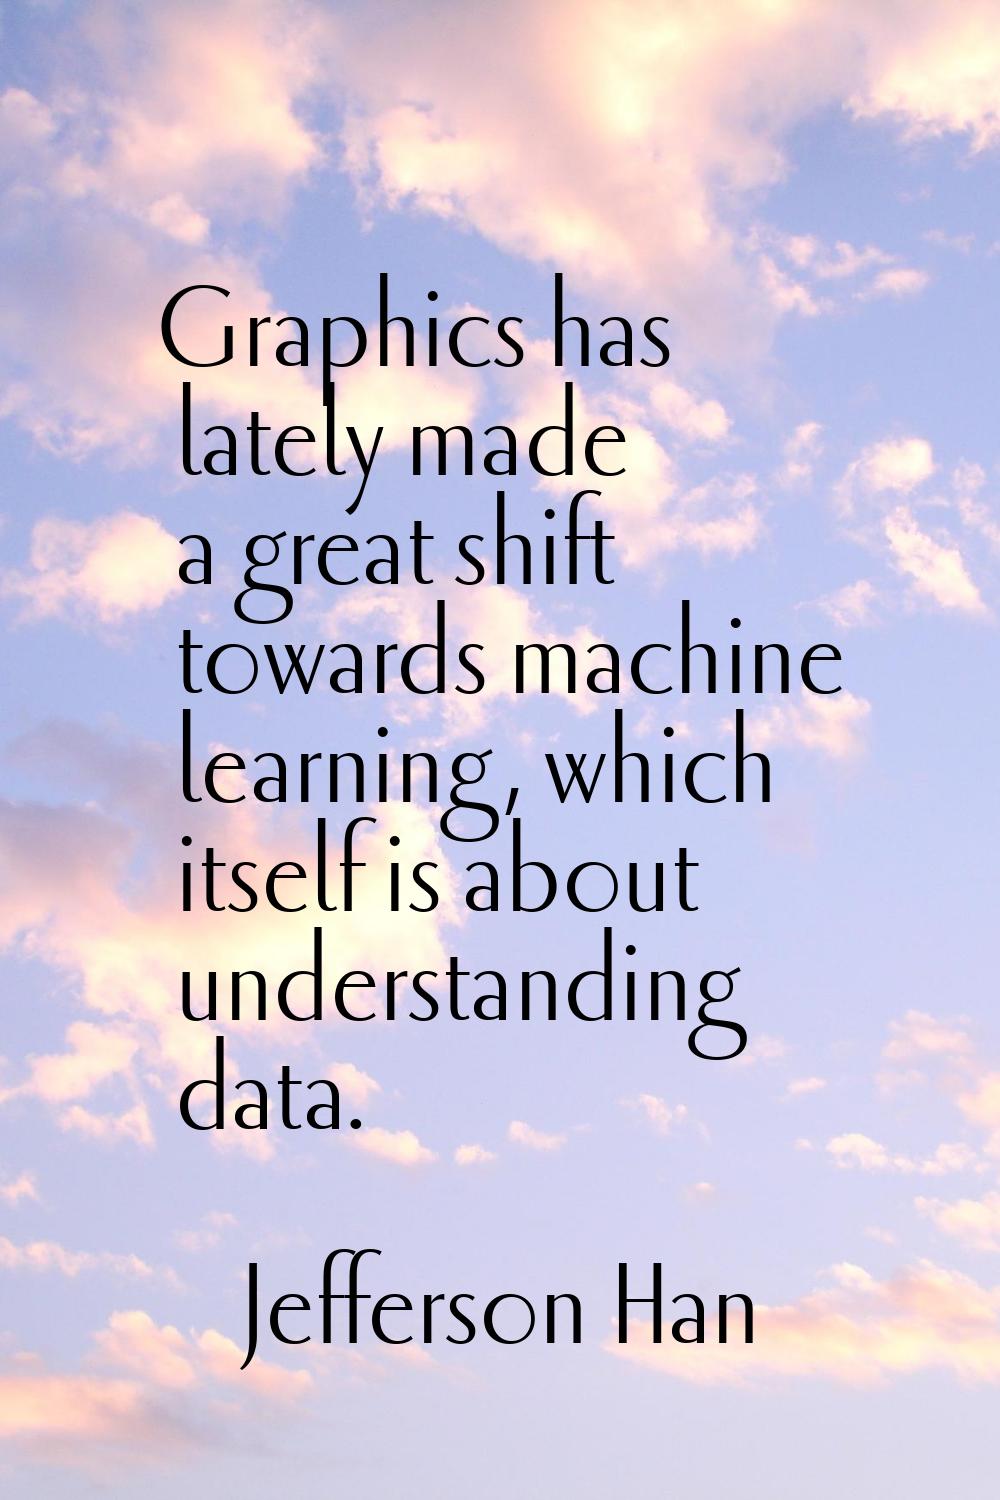 Graphics has lately made a great shift towards machine learning, which itself is about understandin